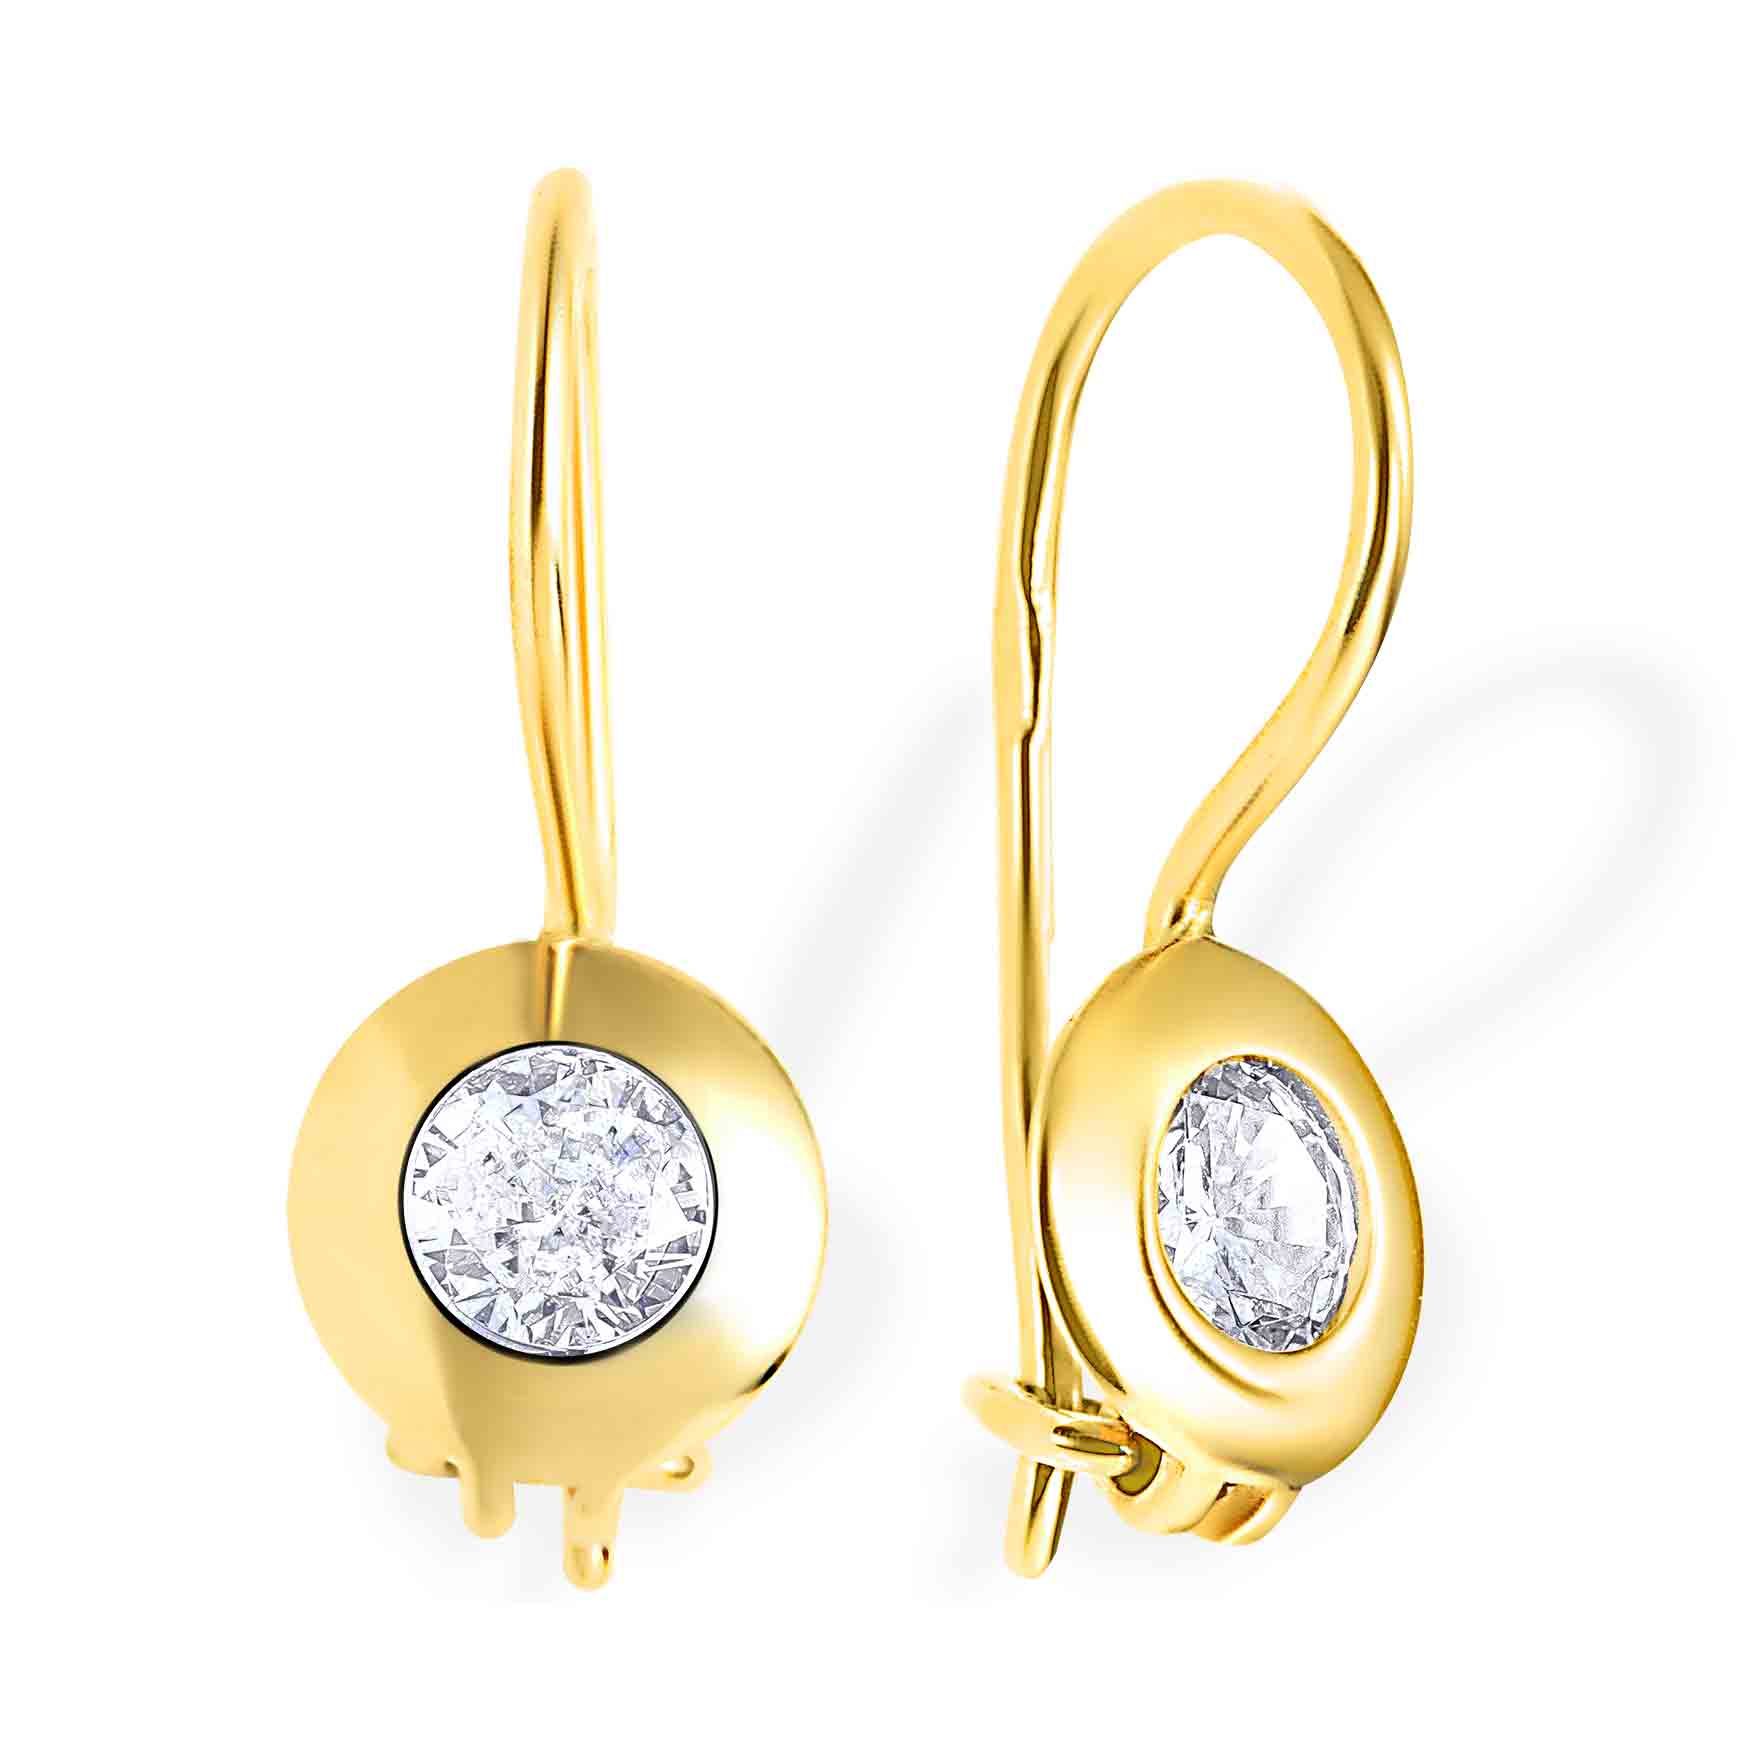 Carissima Gold Women's 9ct Yellow Gold 8mm Ribbed Knot Stud Earrings :  Amazon.co.uk: Fashion